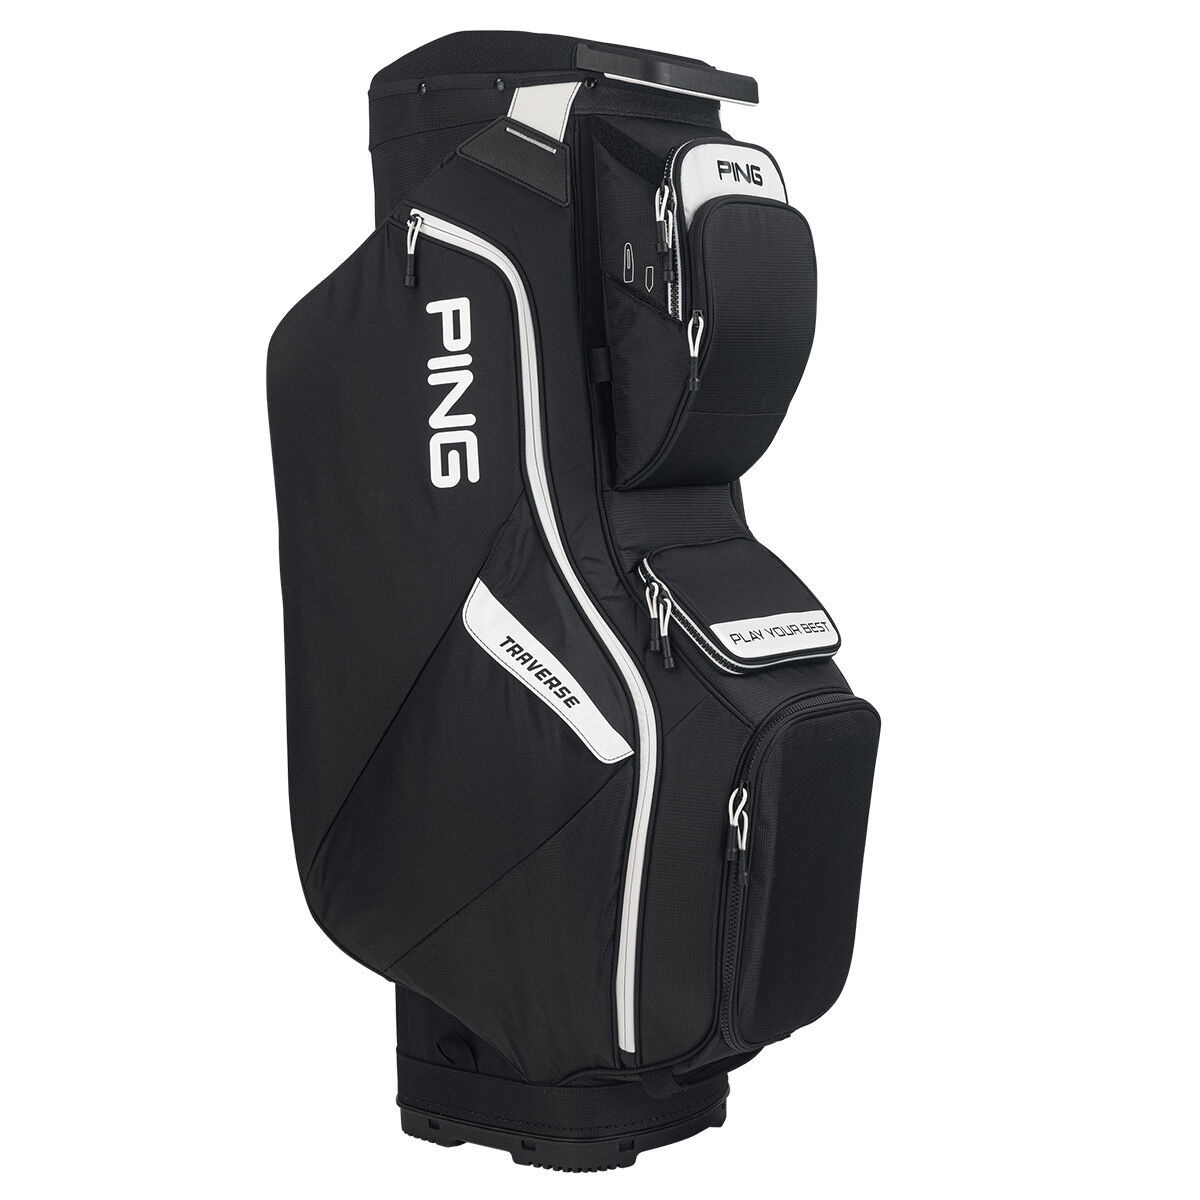 Ping Black and White Lightweight Traverse Golf Cart Bag 2022 | American Golf, One Size